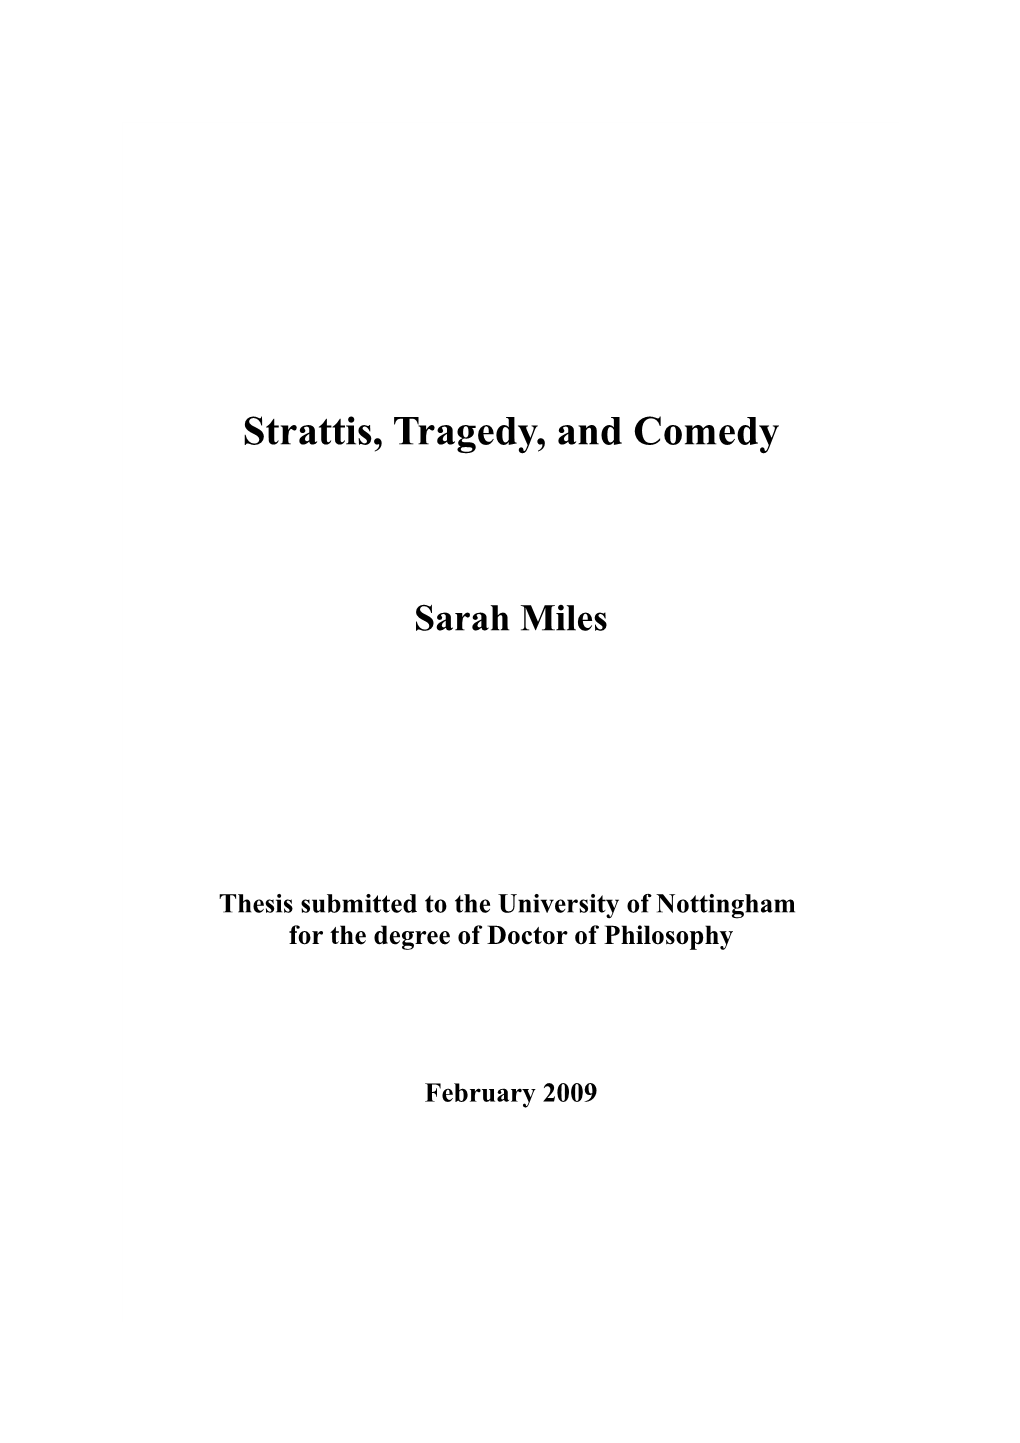 Strattis, Tragedy, and Comedy